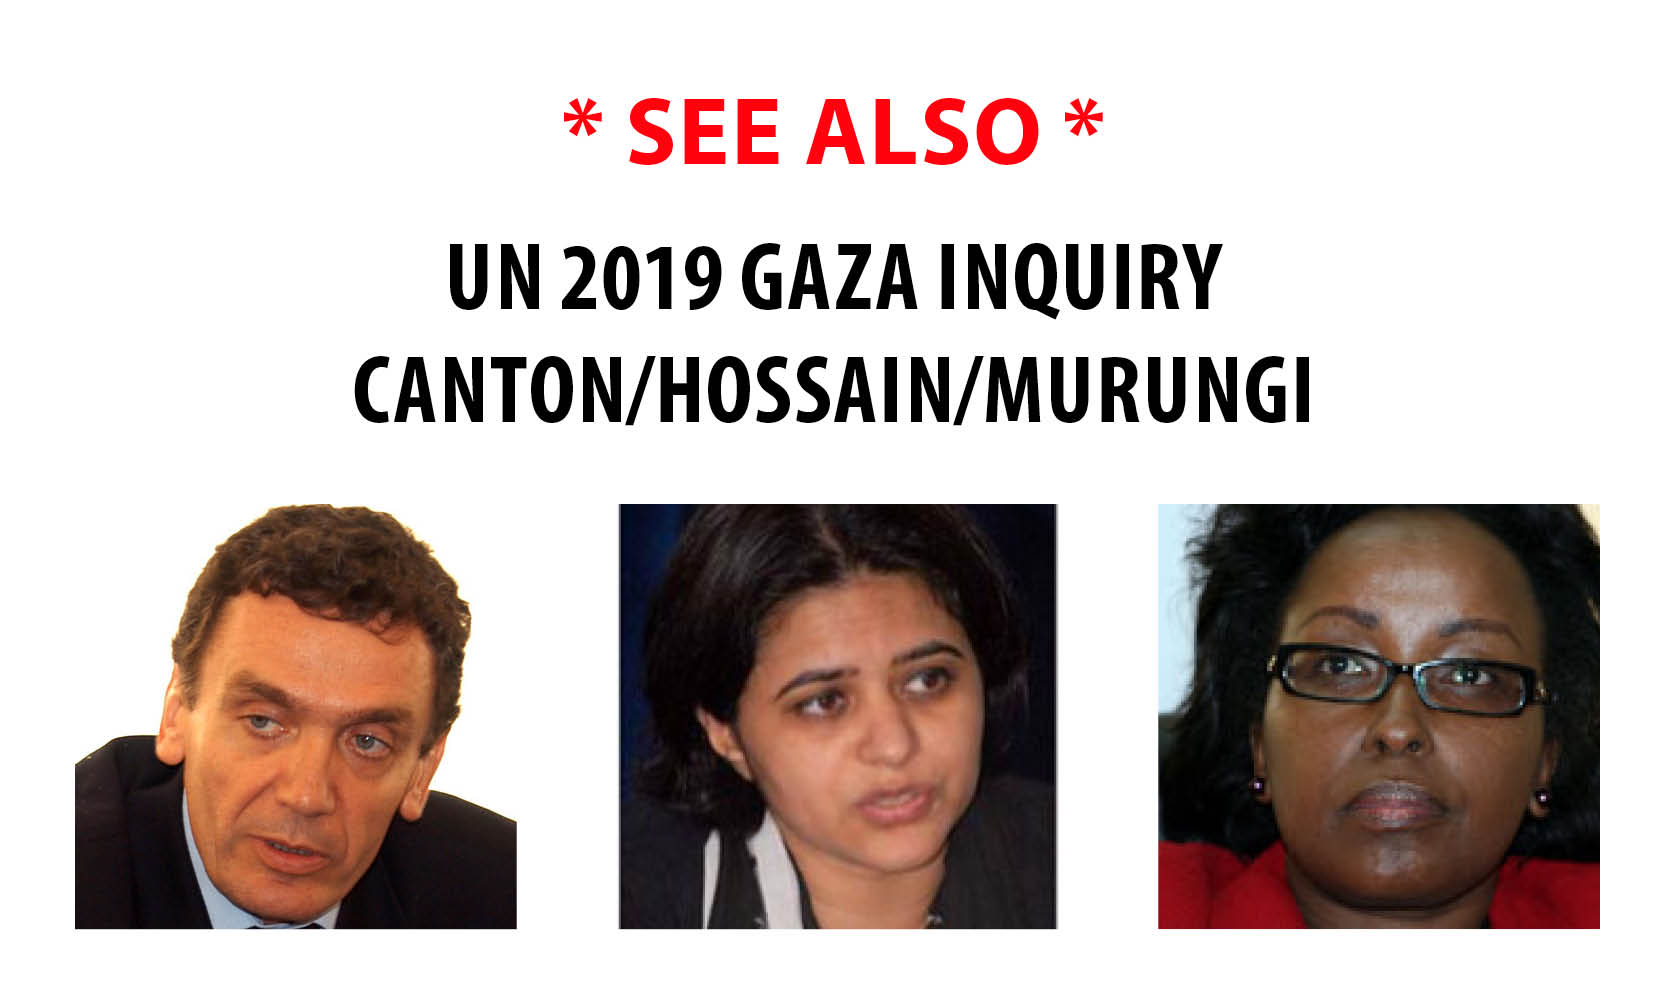 See also: UN Human Rights Council 2019 Gaza Commission of Inquiry